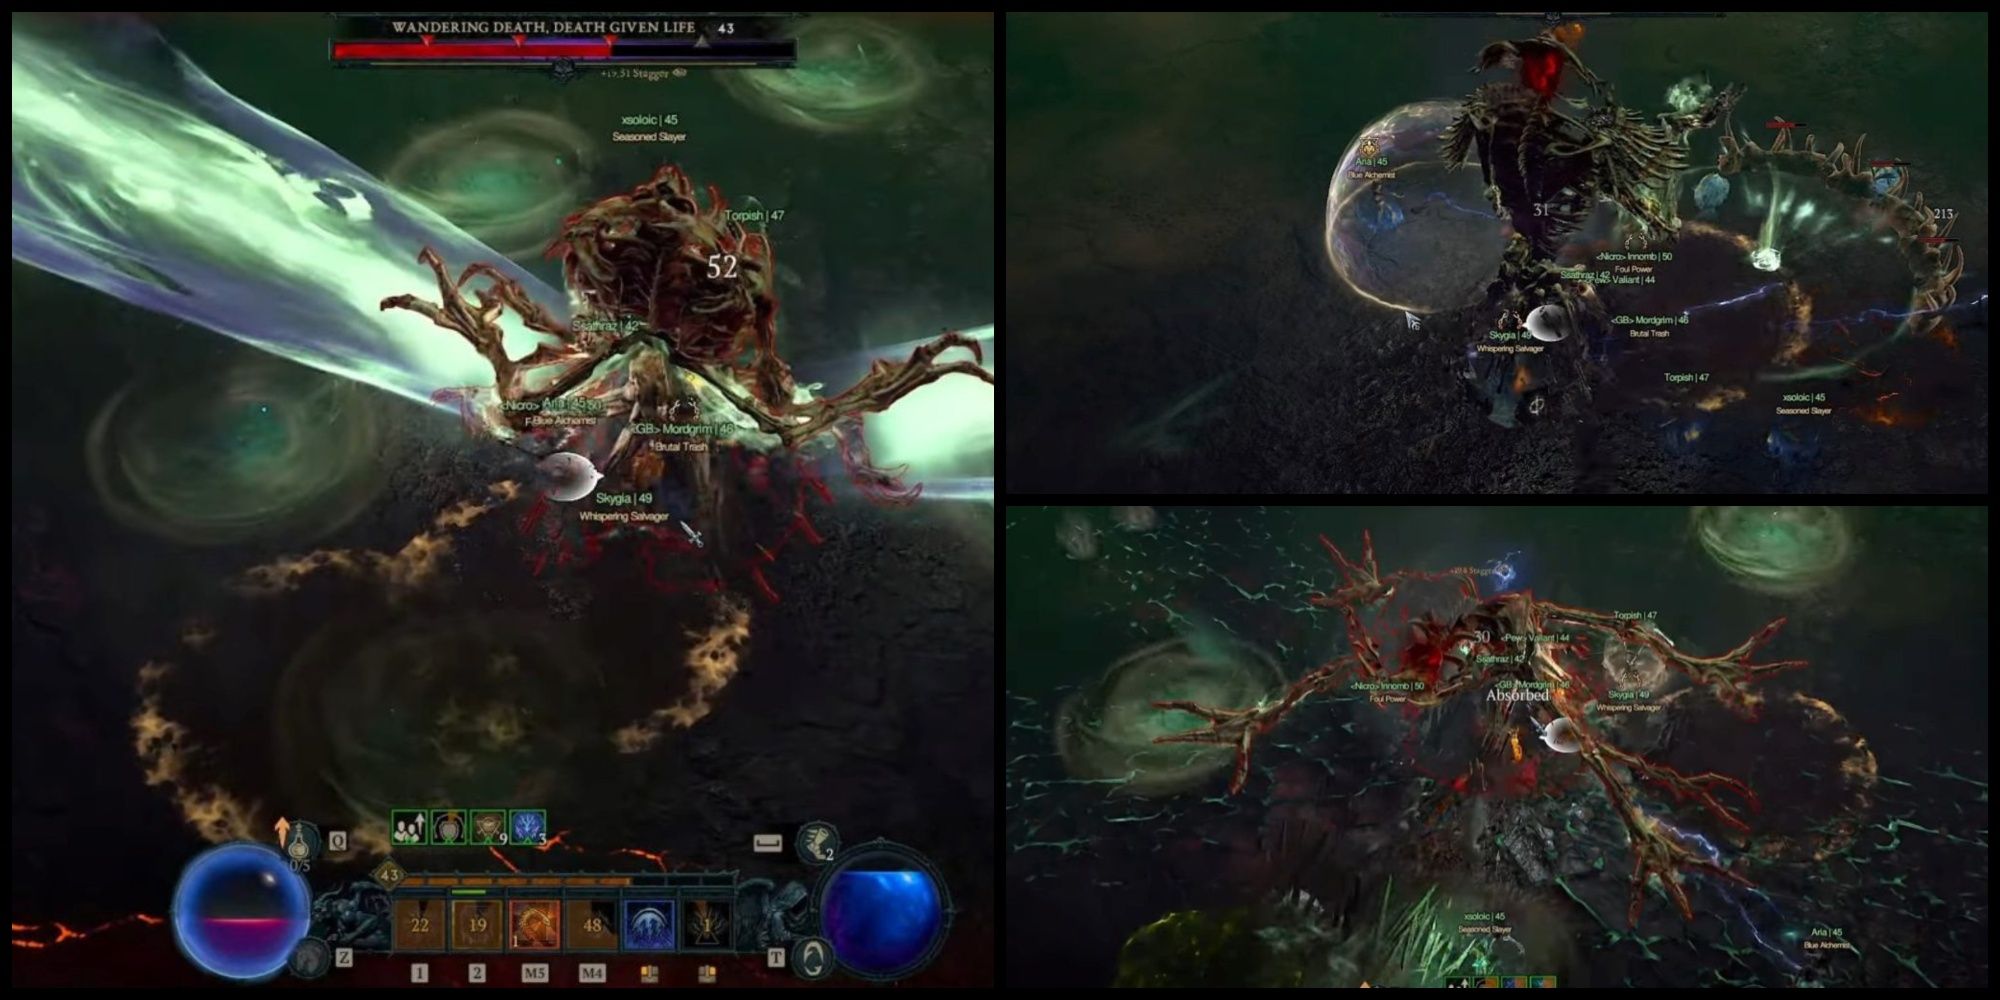 Three of The Wandering Death from Diablo 4's attacks: Beam, Crater, Tornado